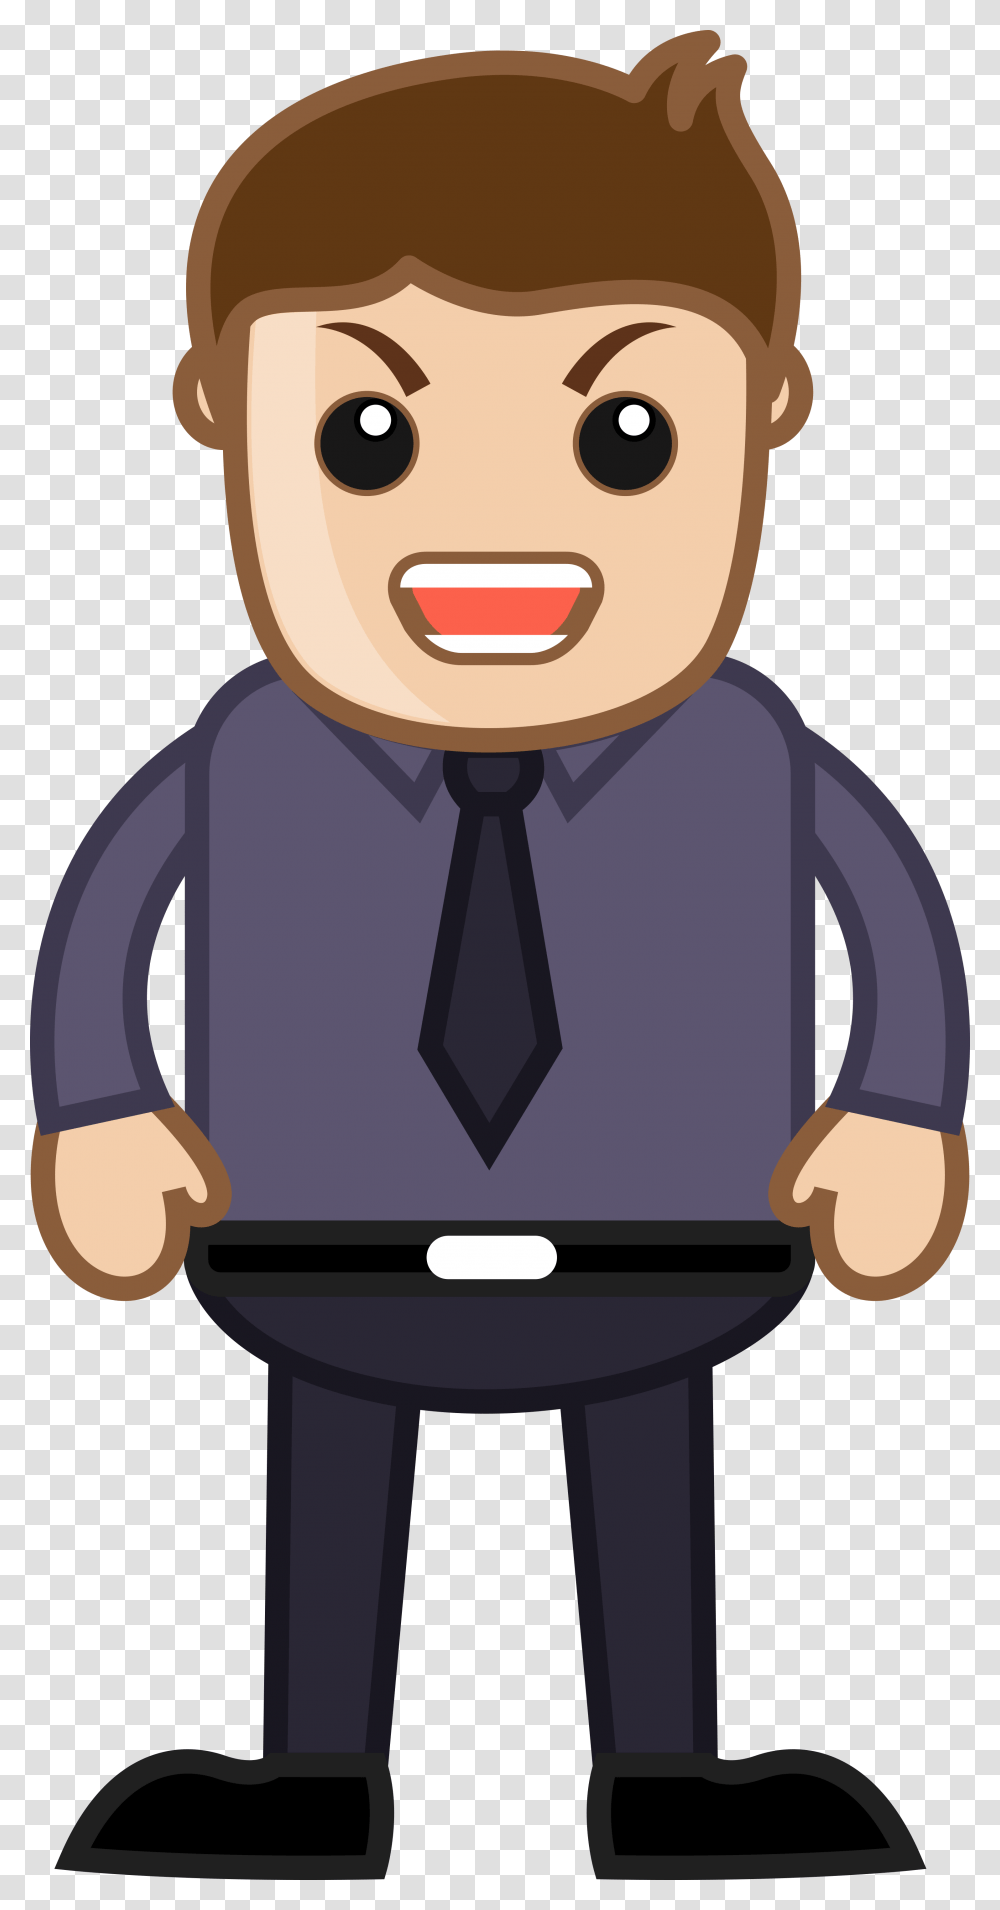 Angry Man Corporate Cartoon Cartoon People Angry, Toy, Performer, Judge Transparent Png